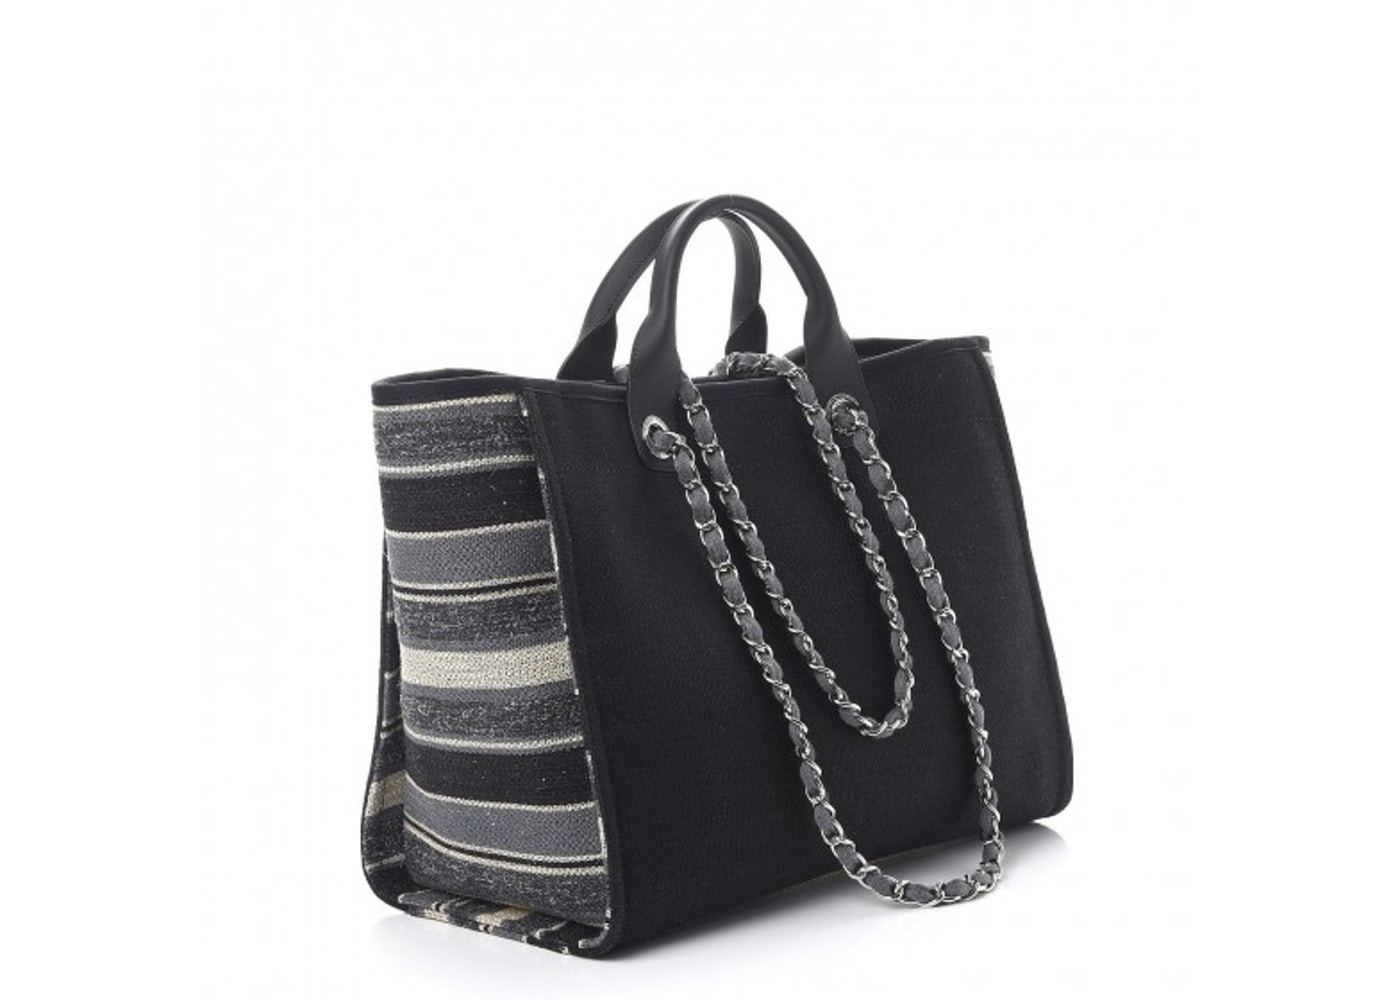 Chanel Deauville Fabric Tote Black With Grey, Black And White Stripes